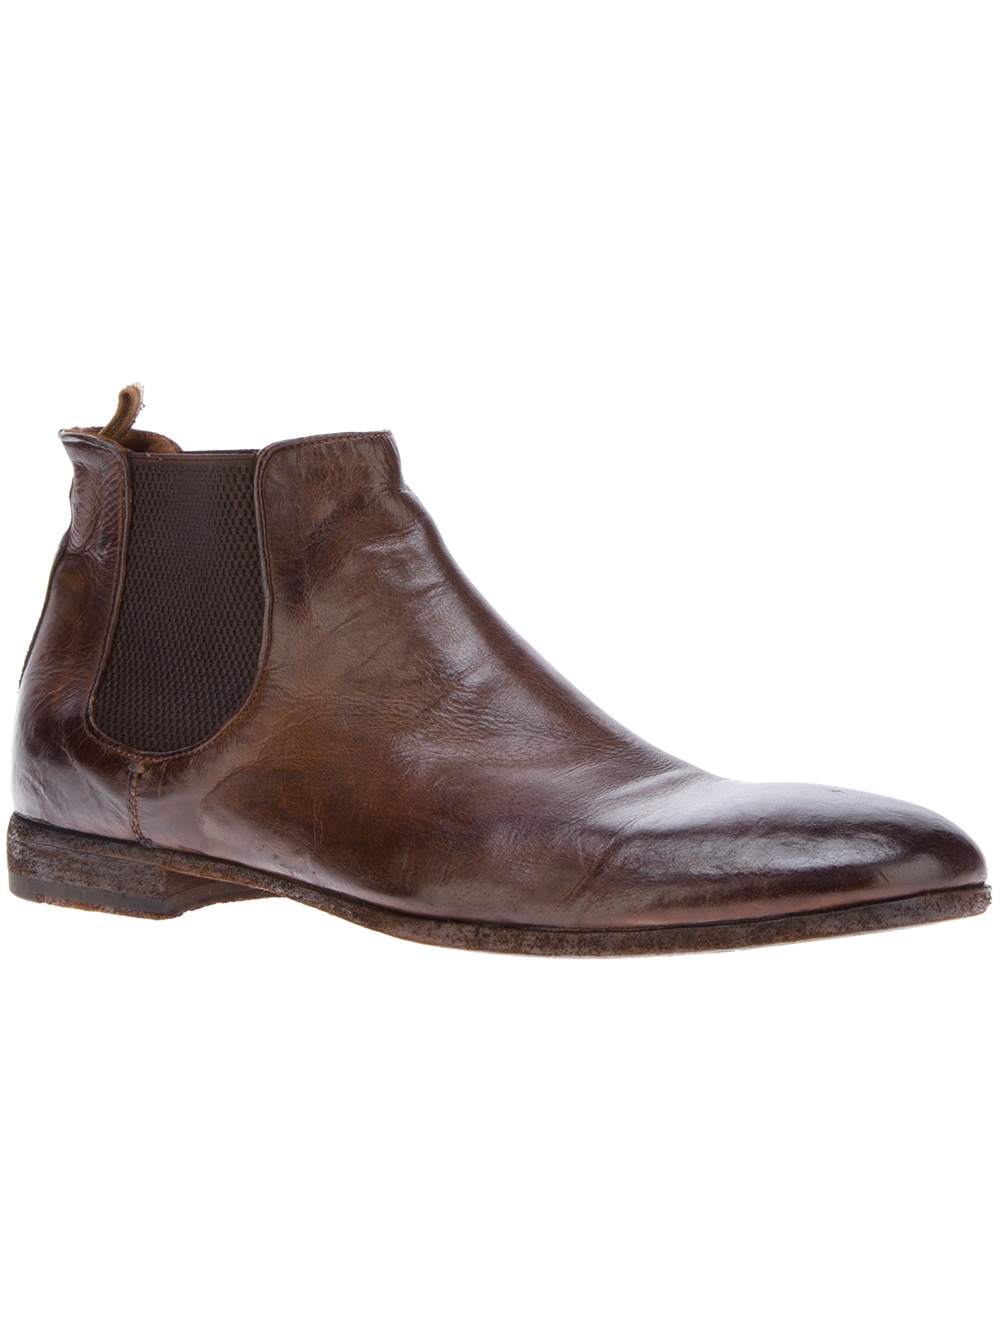 Officine creative Ankle Boot in Brown for Men | Lyst